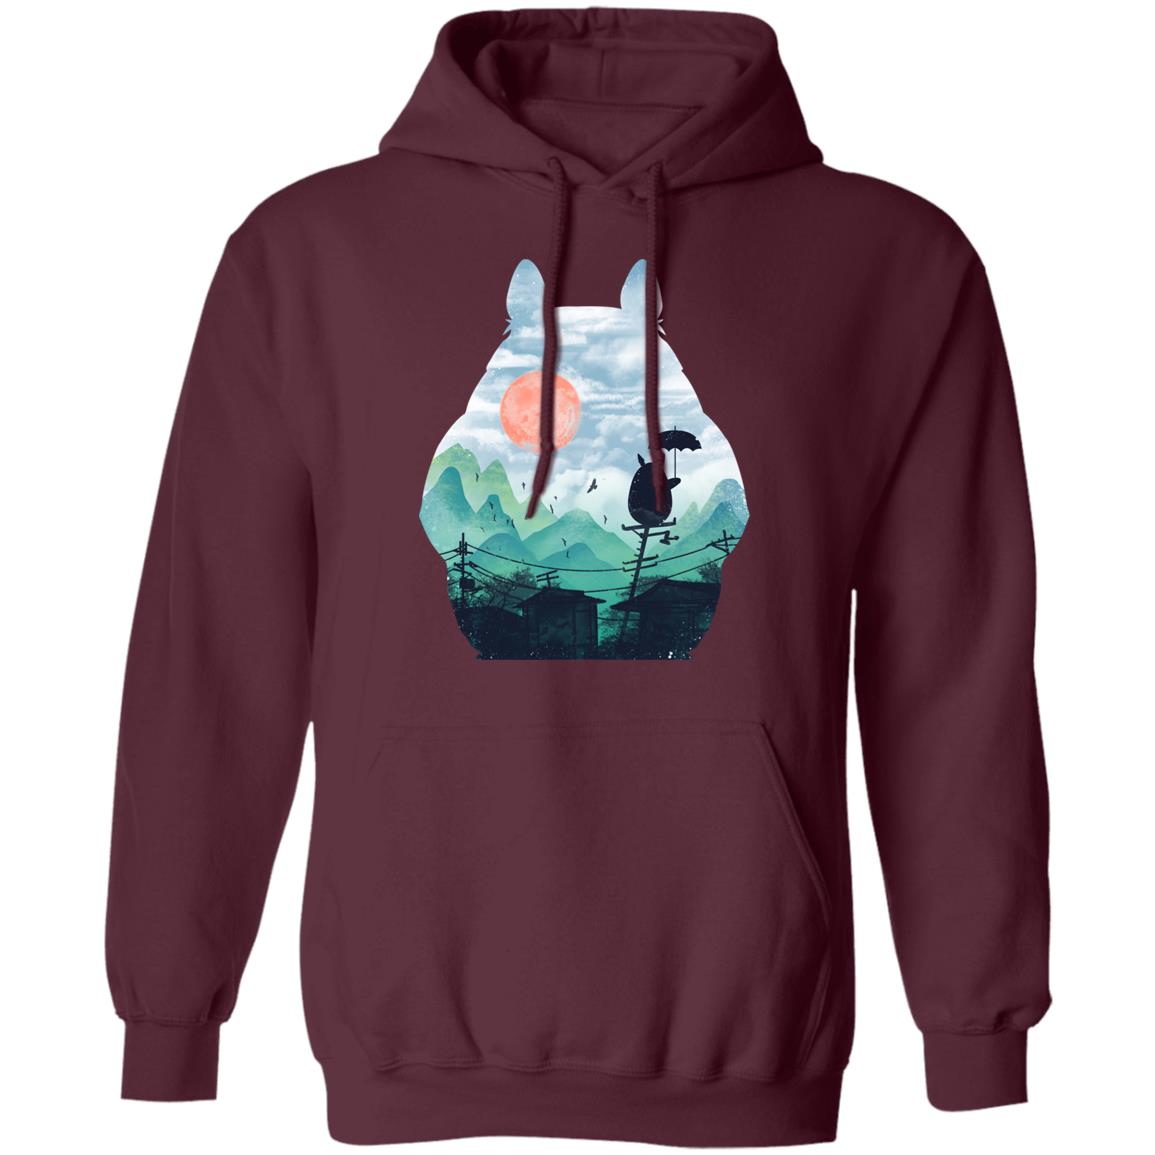 Totoro on the Line Lanscape Hoodie